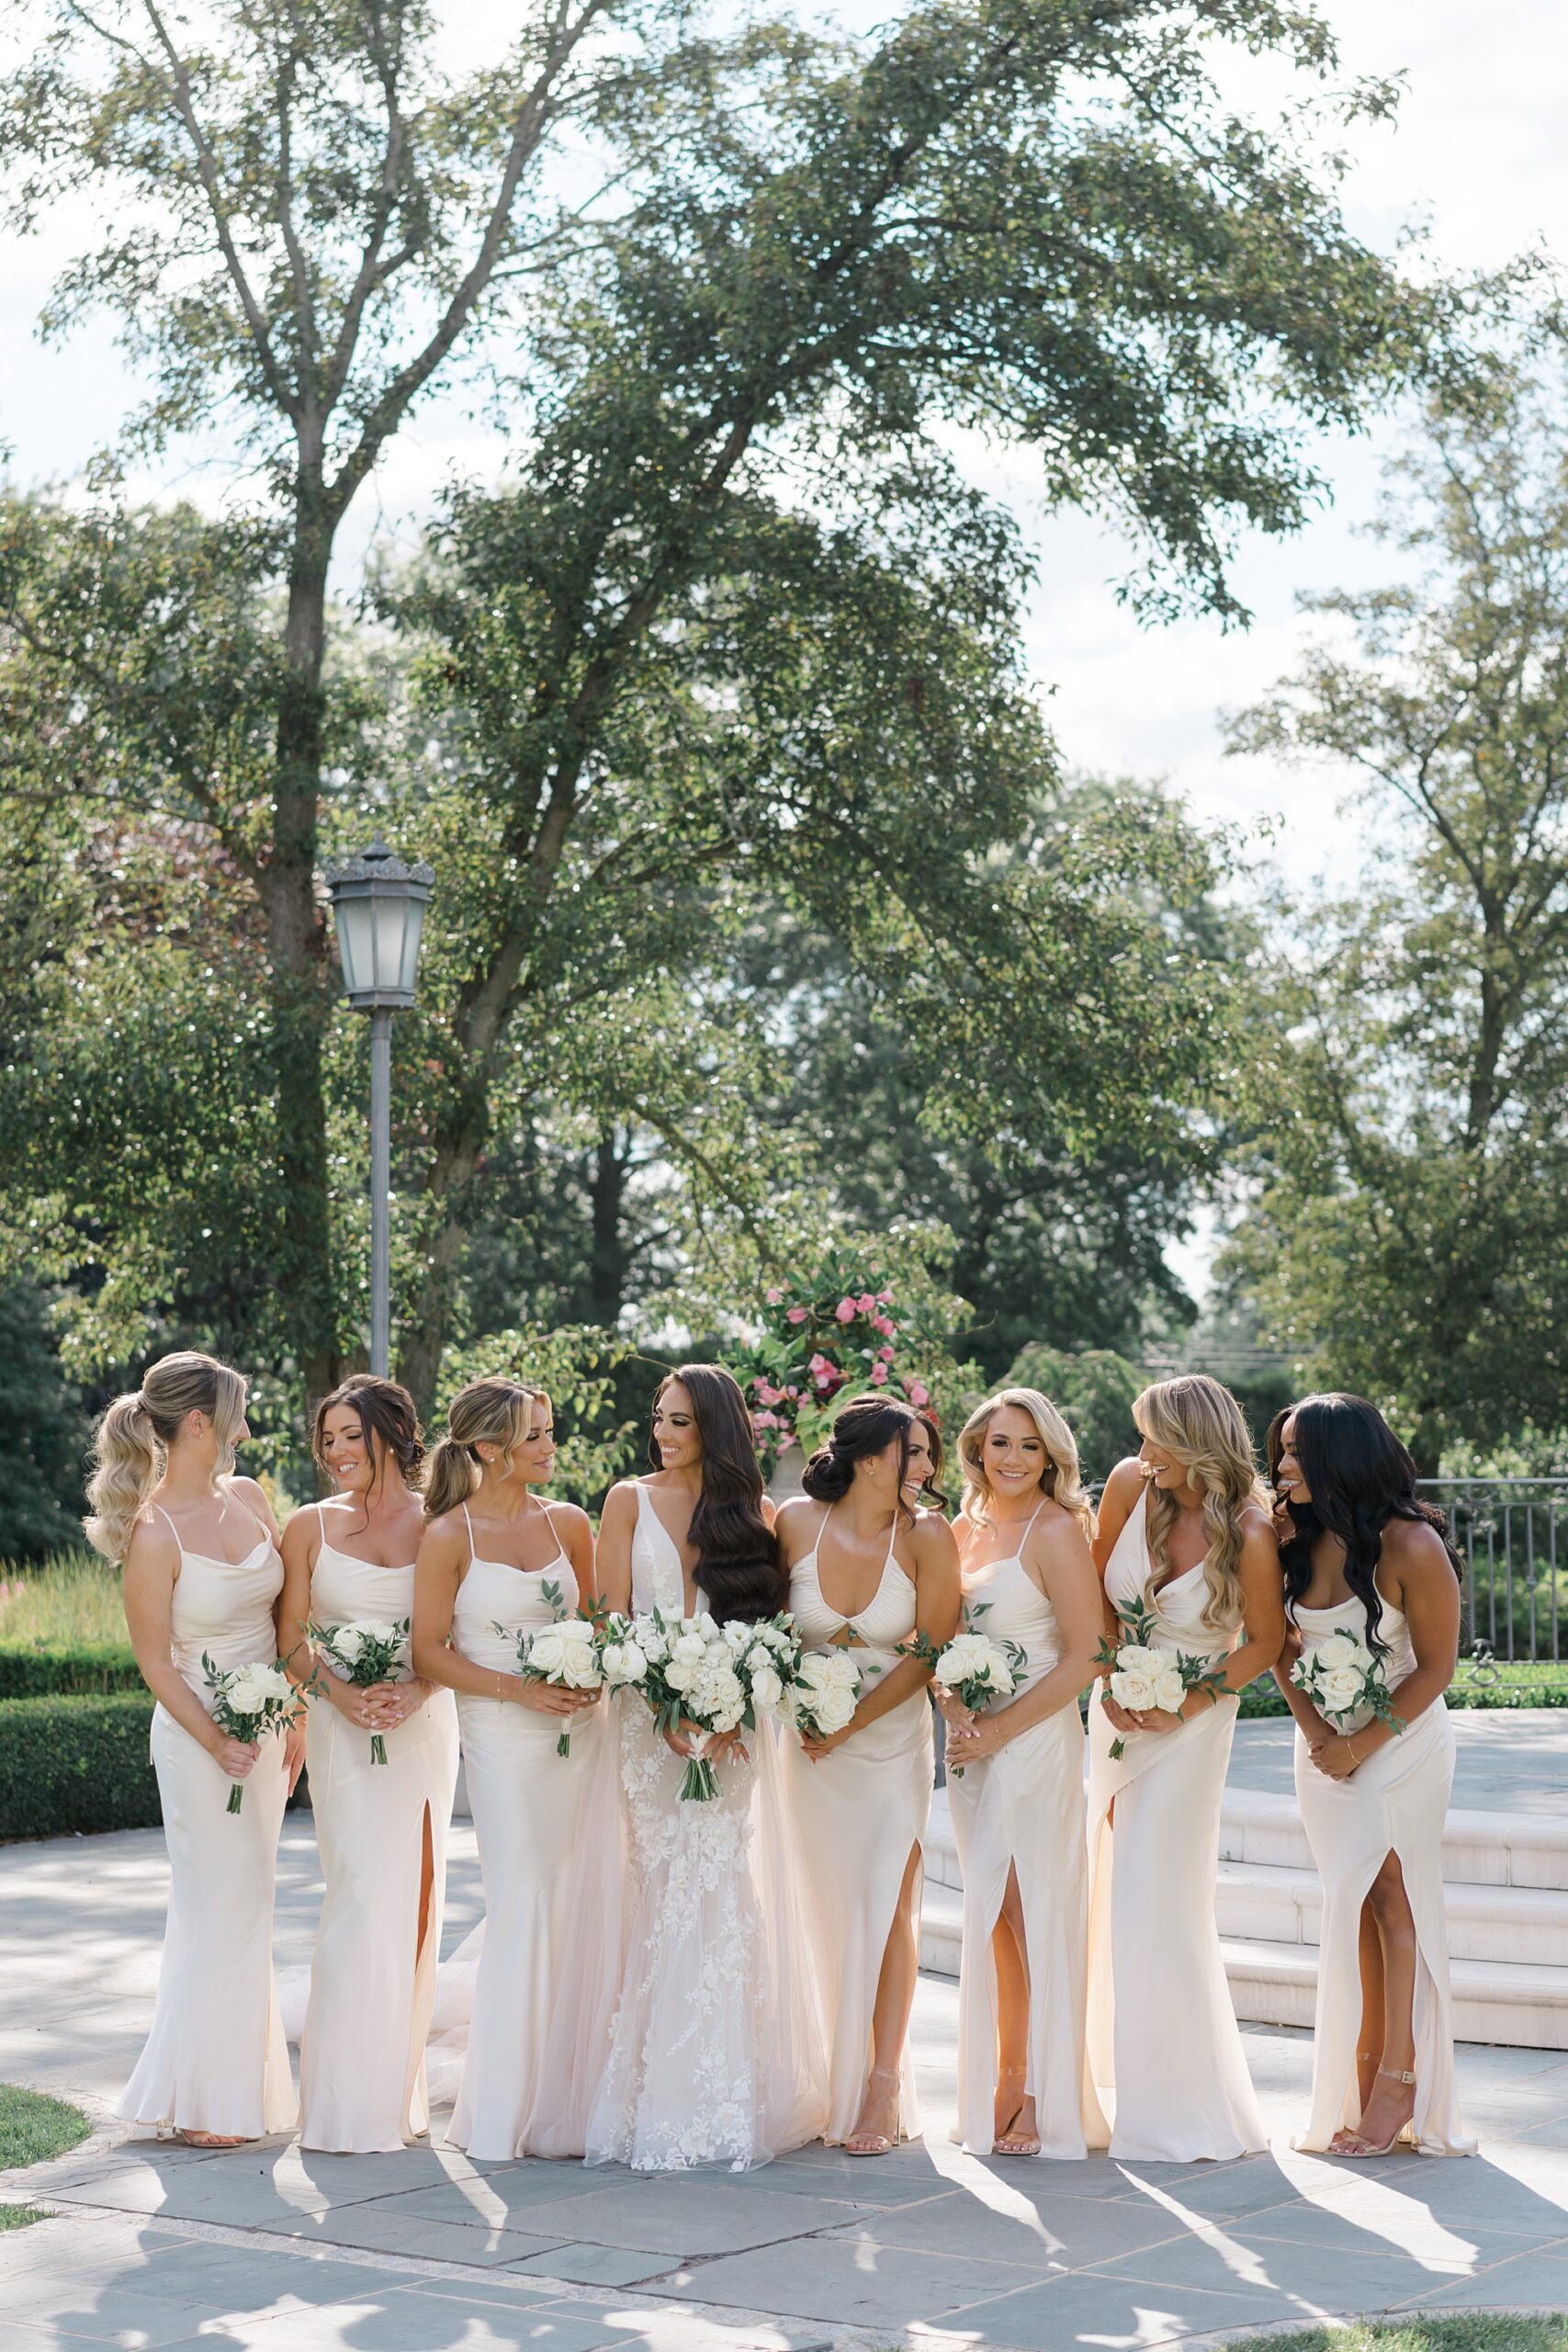 bridal party portraits in timeless, chic white satin dresses 